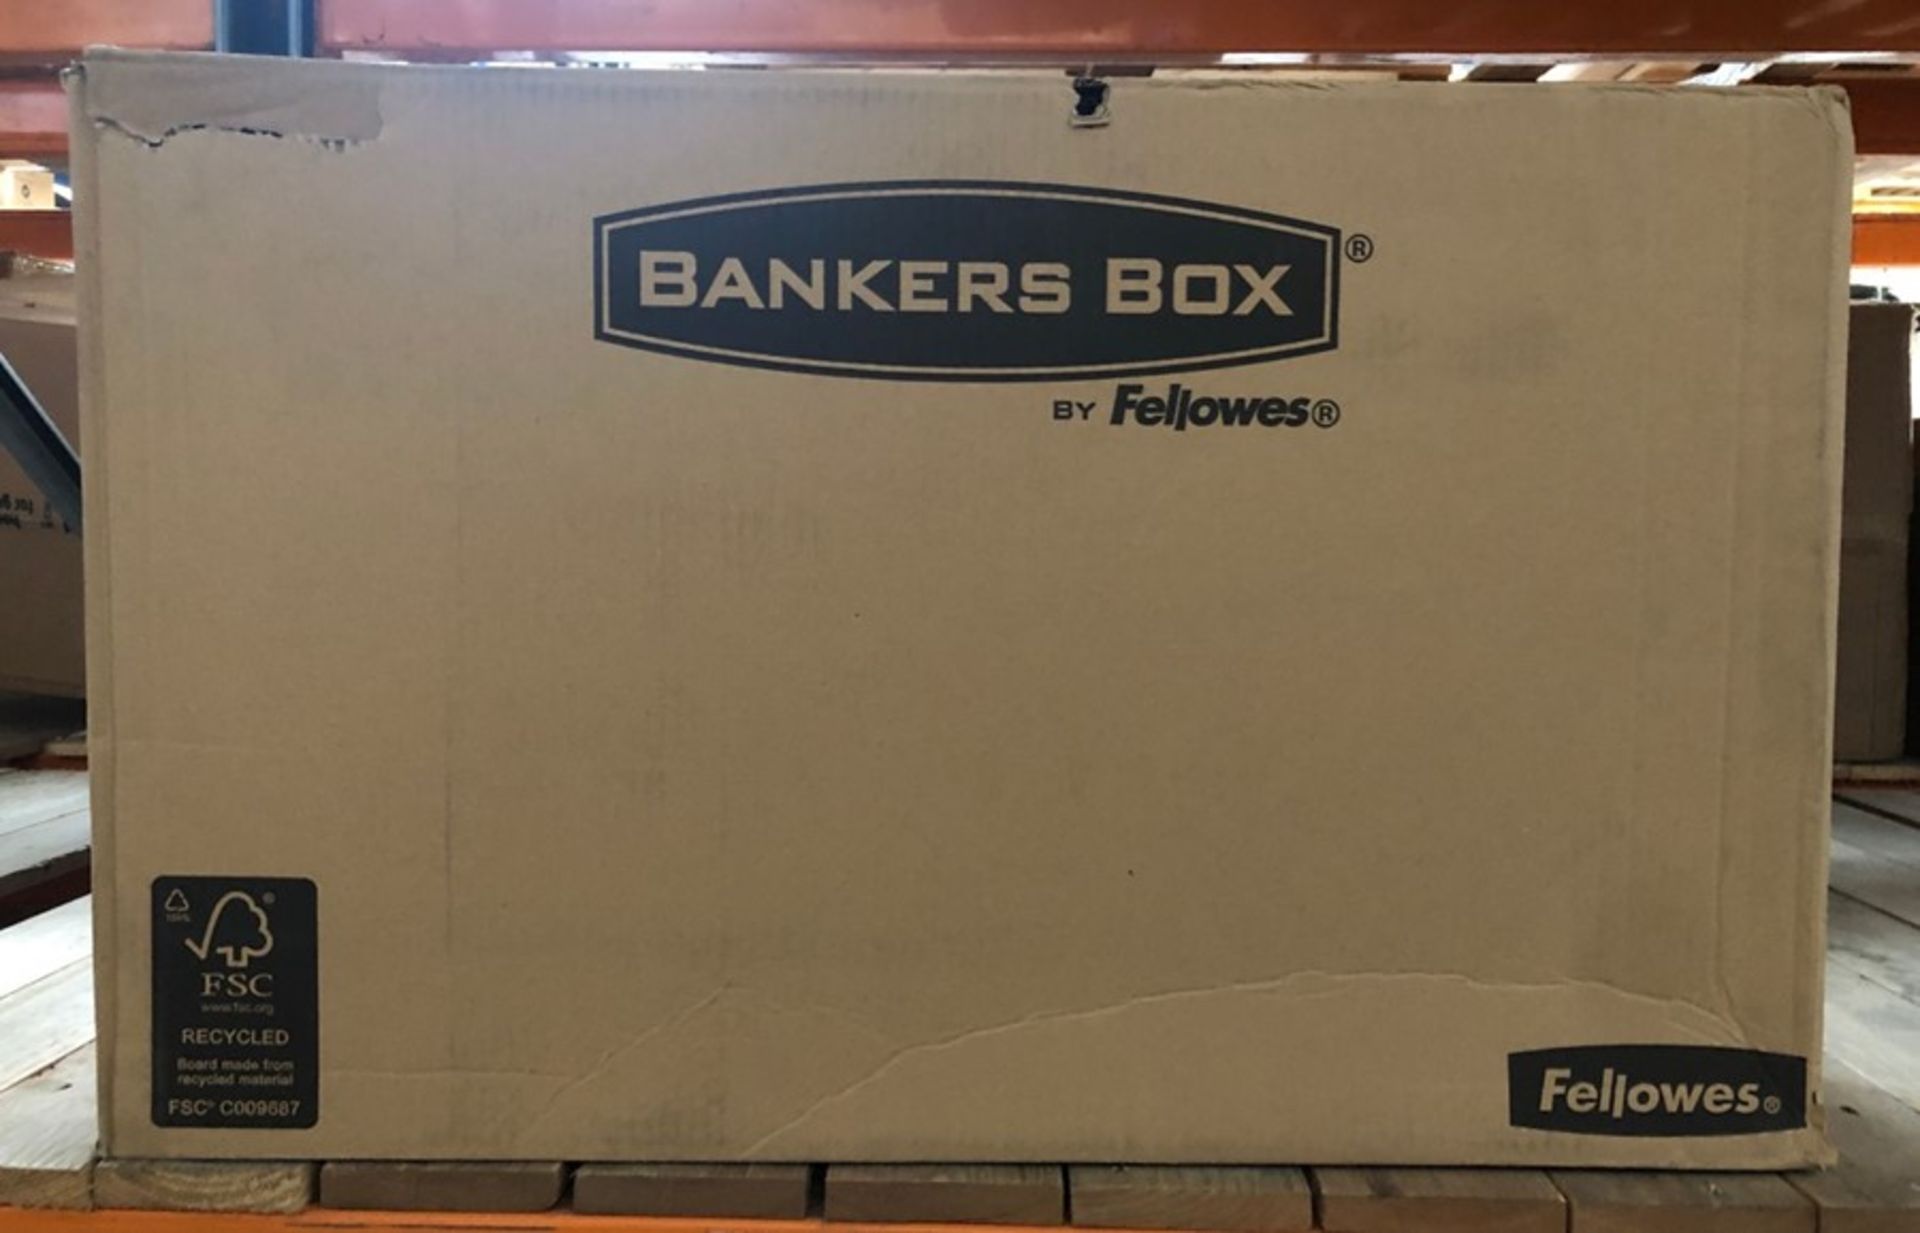 1 X BOX TO CONTAIN 10 FELLOWES BANKERS BOX CARDBOARD STOARGE BOXES